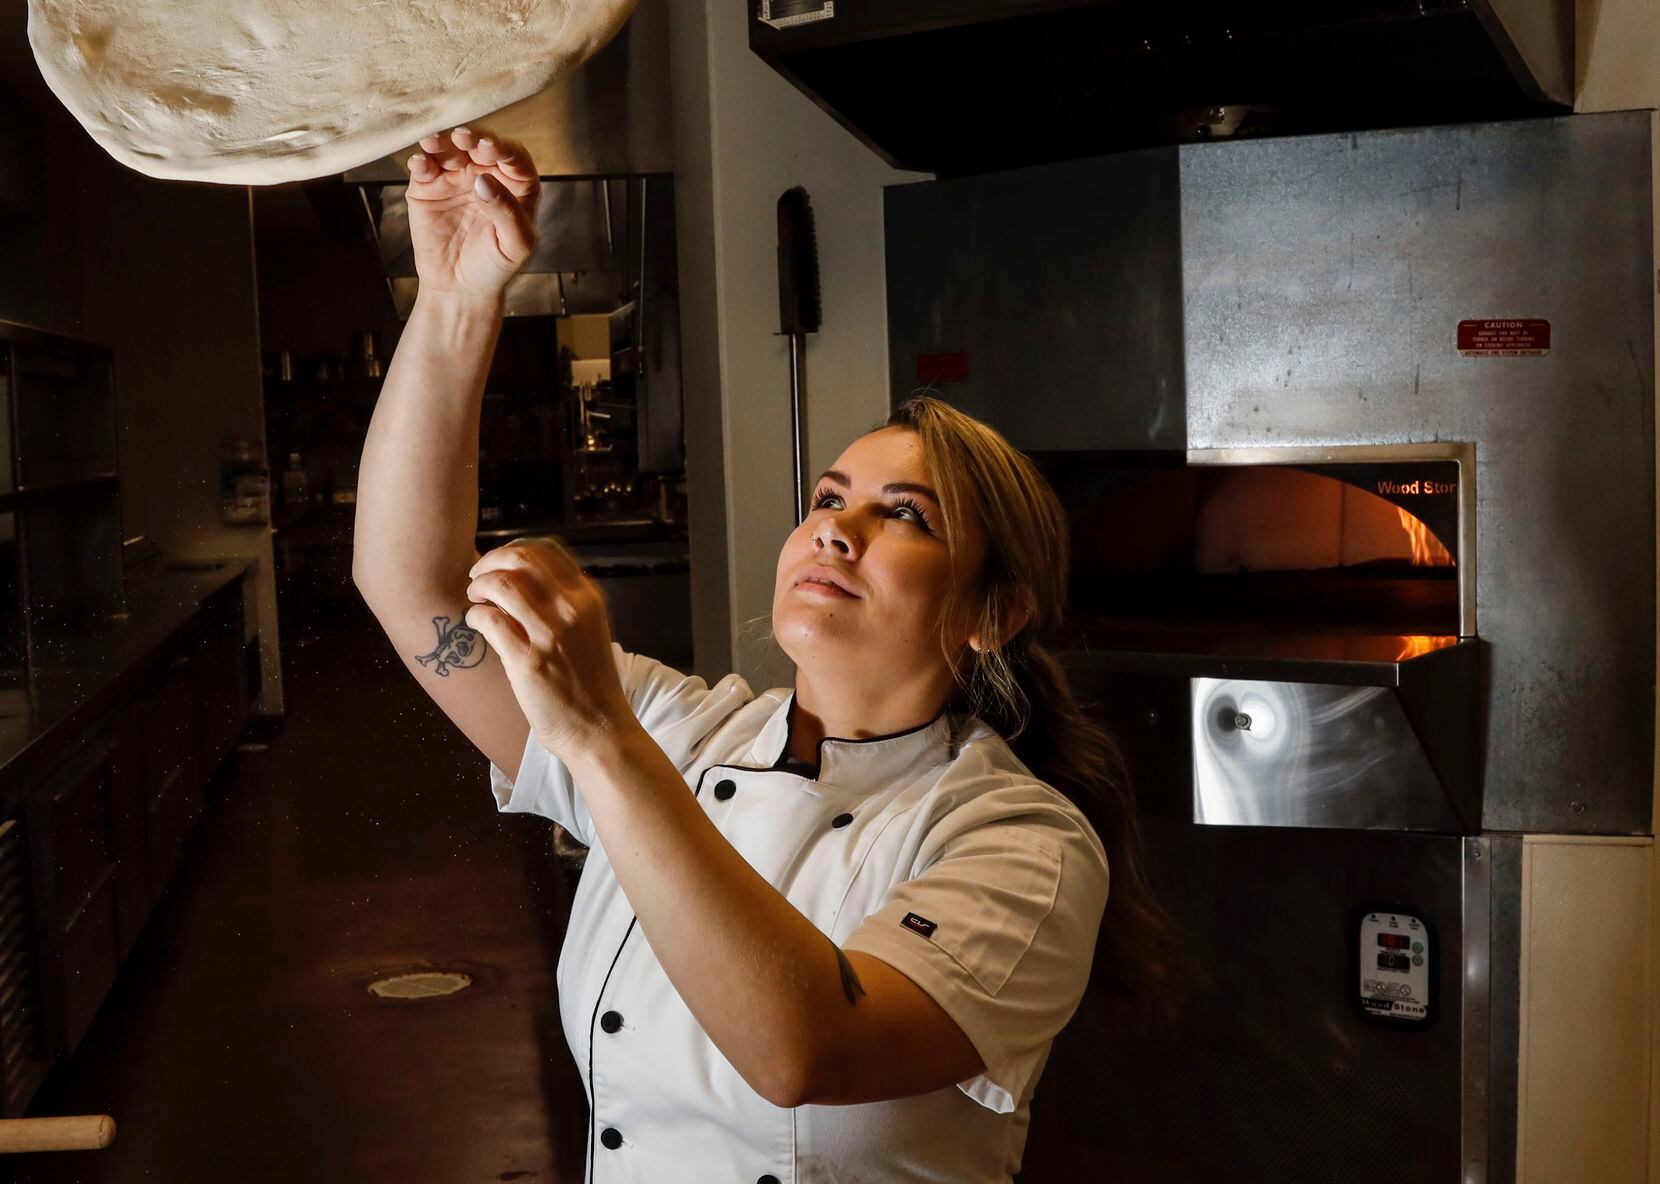 Michelle Tribble, executive chef of culinary development for Gordon Ramsay North America, tosses pizza dough in a kitchen at Dallas College's culinary facility in Dallas. Ramsay's company has partnered with Dallas College to use some of its test kitchens.